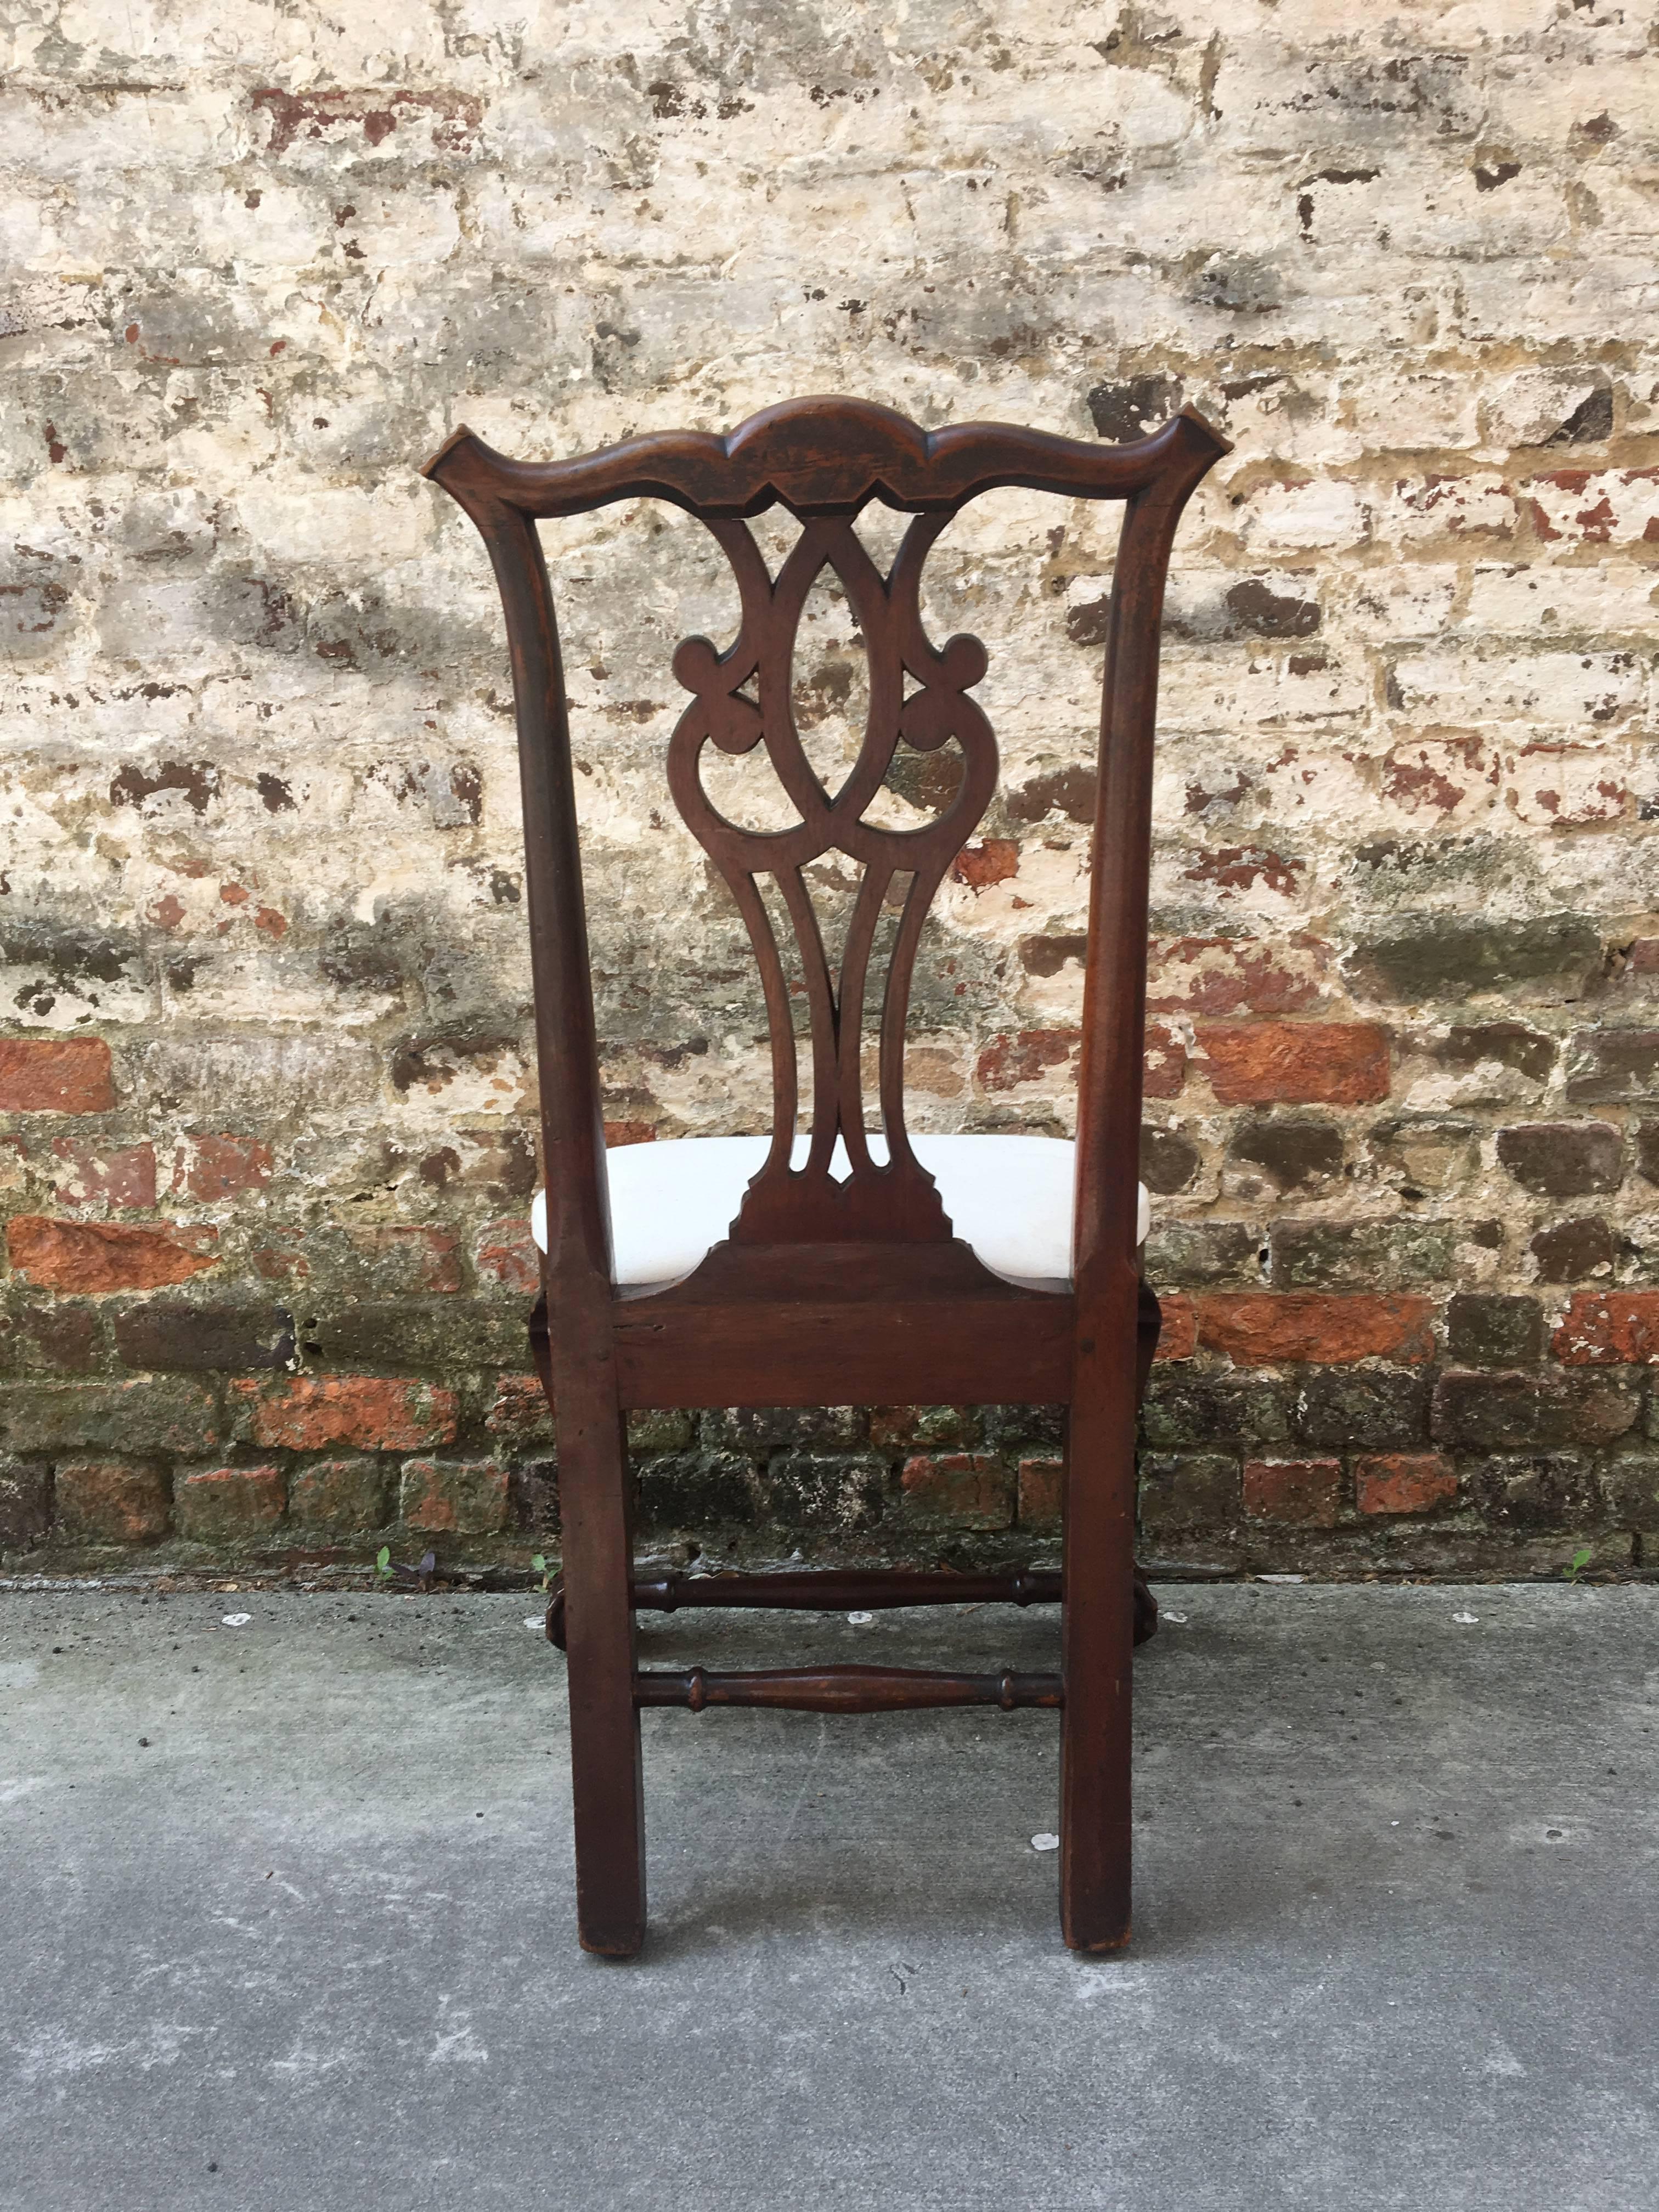 19th century American mahogany side chair with ball and claw feet.